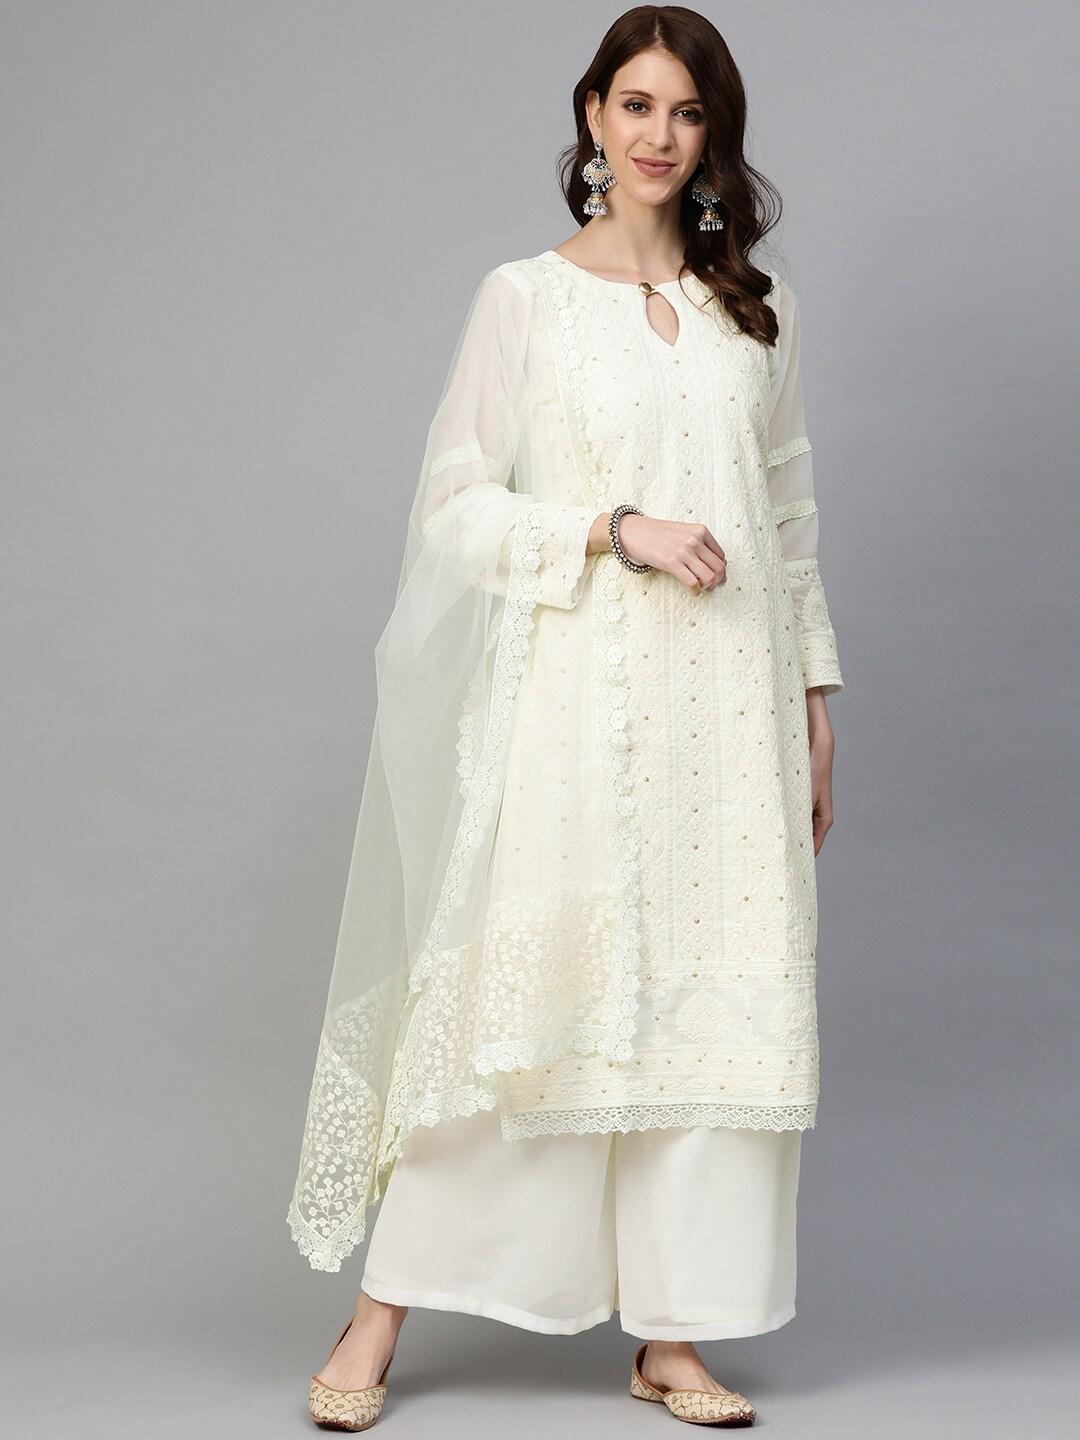 Readiprint Fashions Off-White Georgette Embroidered Semi-Stitched Dress Material